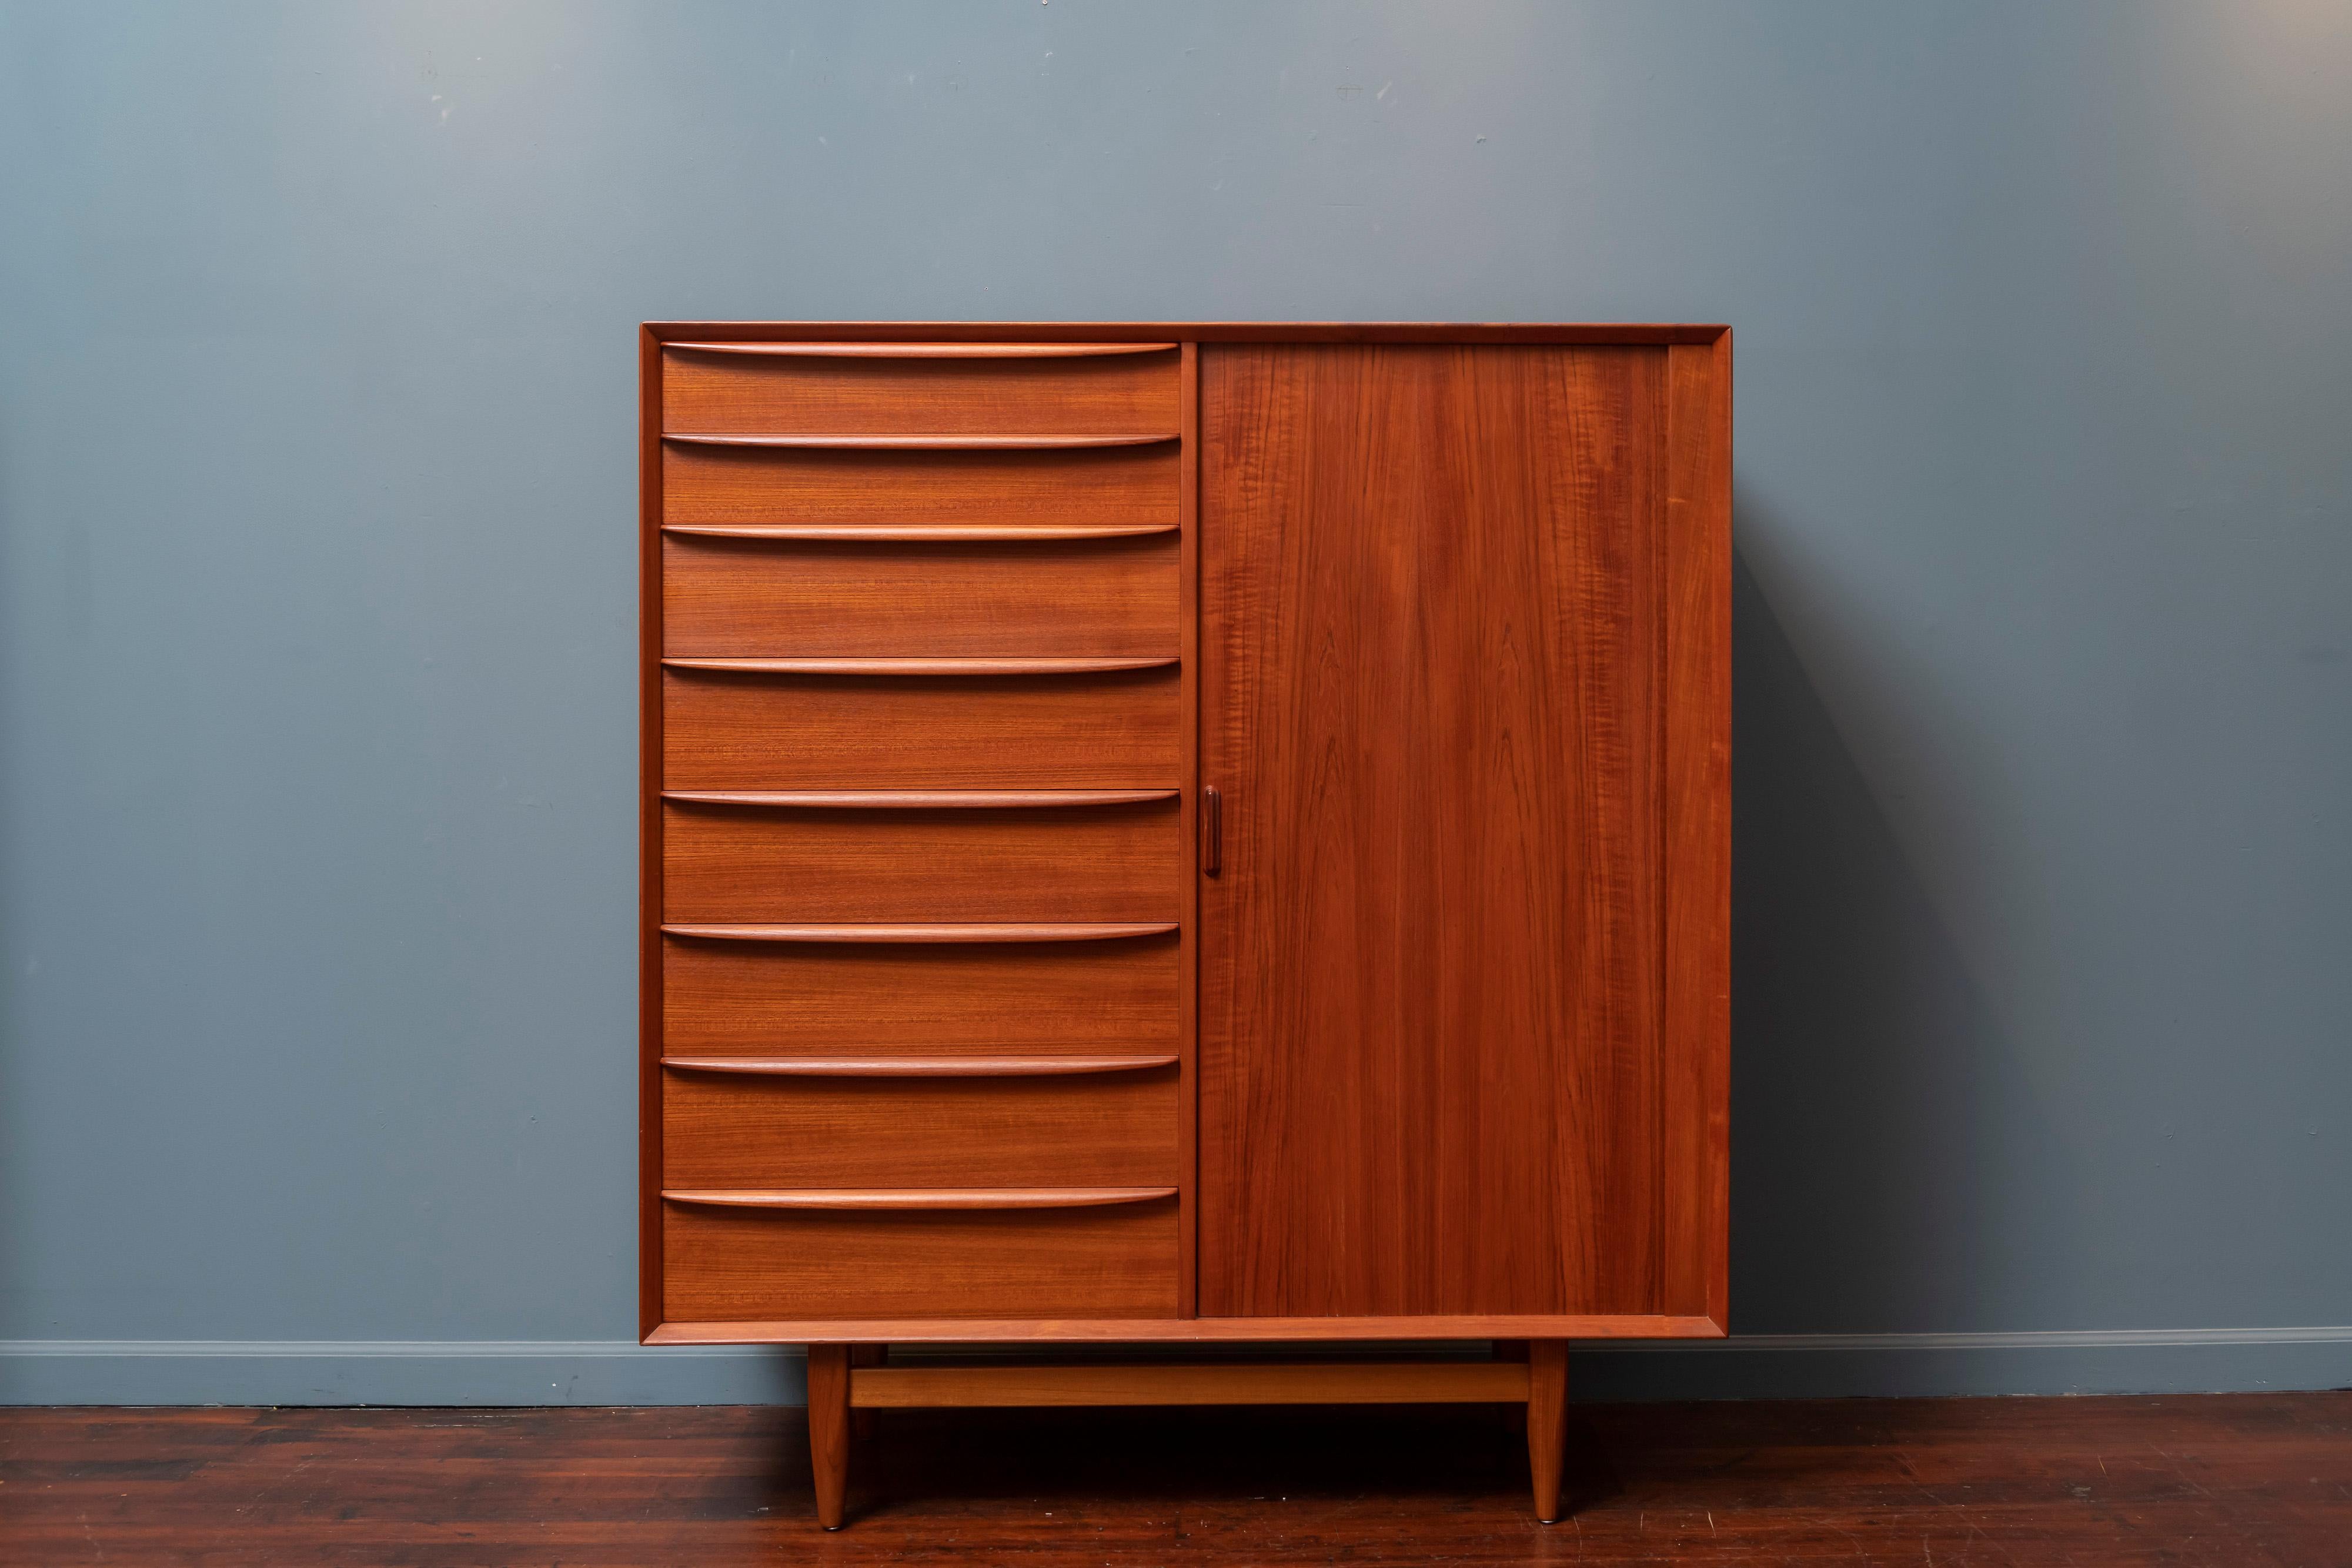 Mid-Century Modern teak gentleman's chest or tall dresser for Falster, Mobelfabrik Denmark. 
Featuring 17 drawers with 8 on the left and another 9 hidden behind a tambour door. Newly refinished and ready to enjoy.